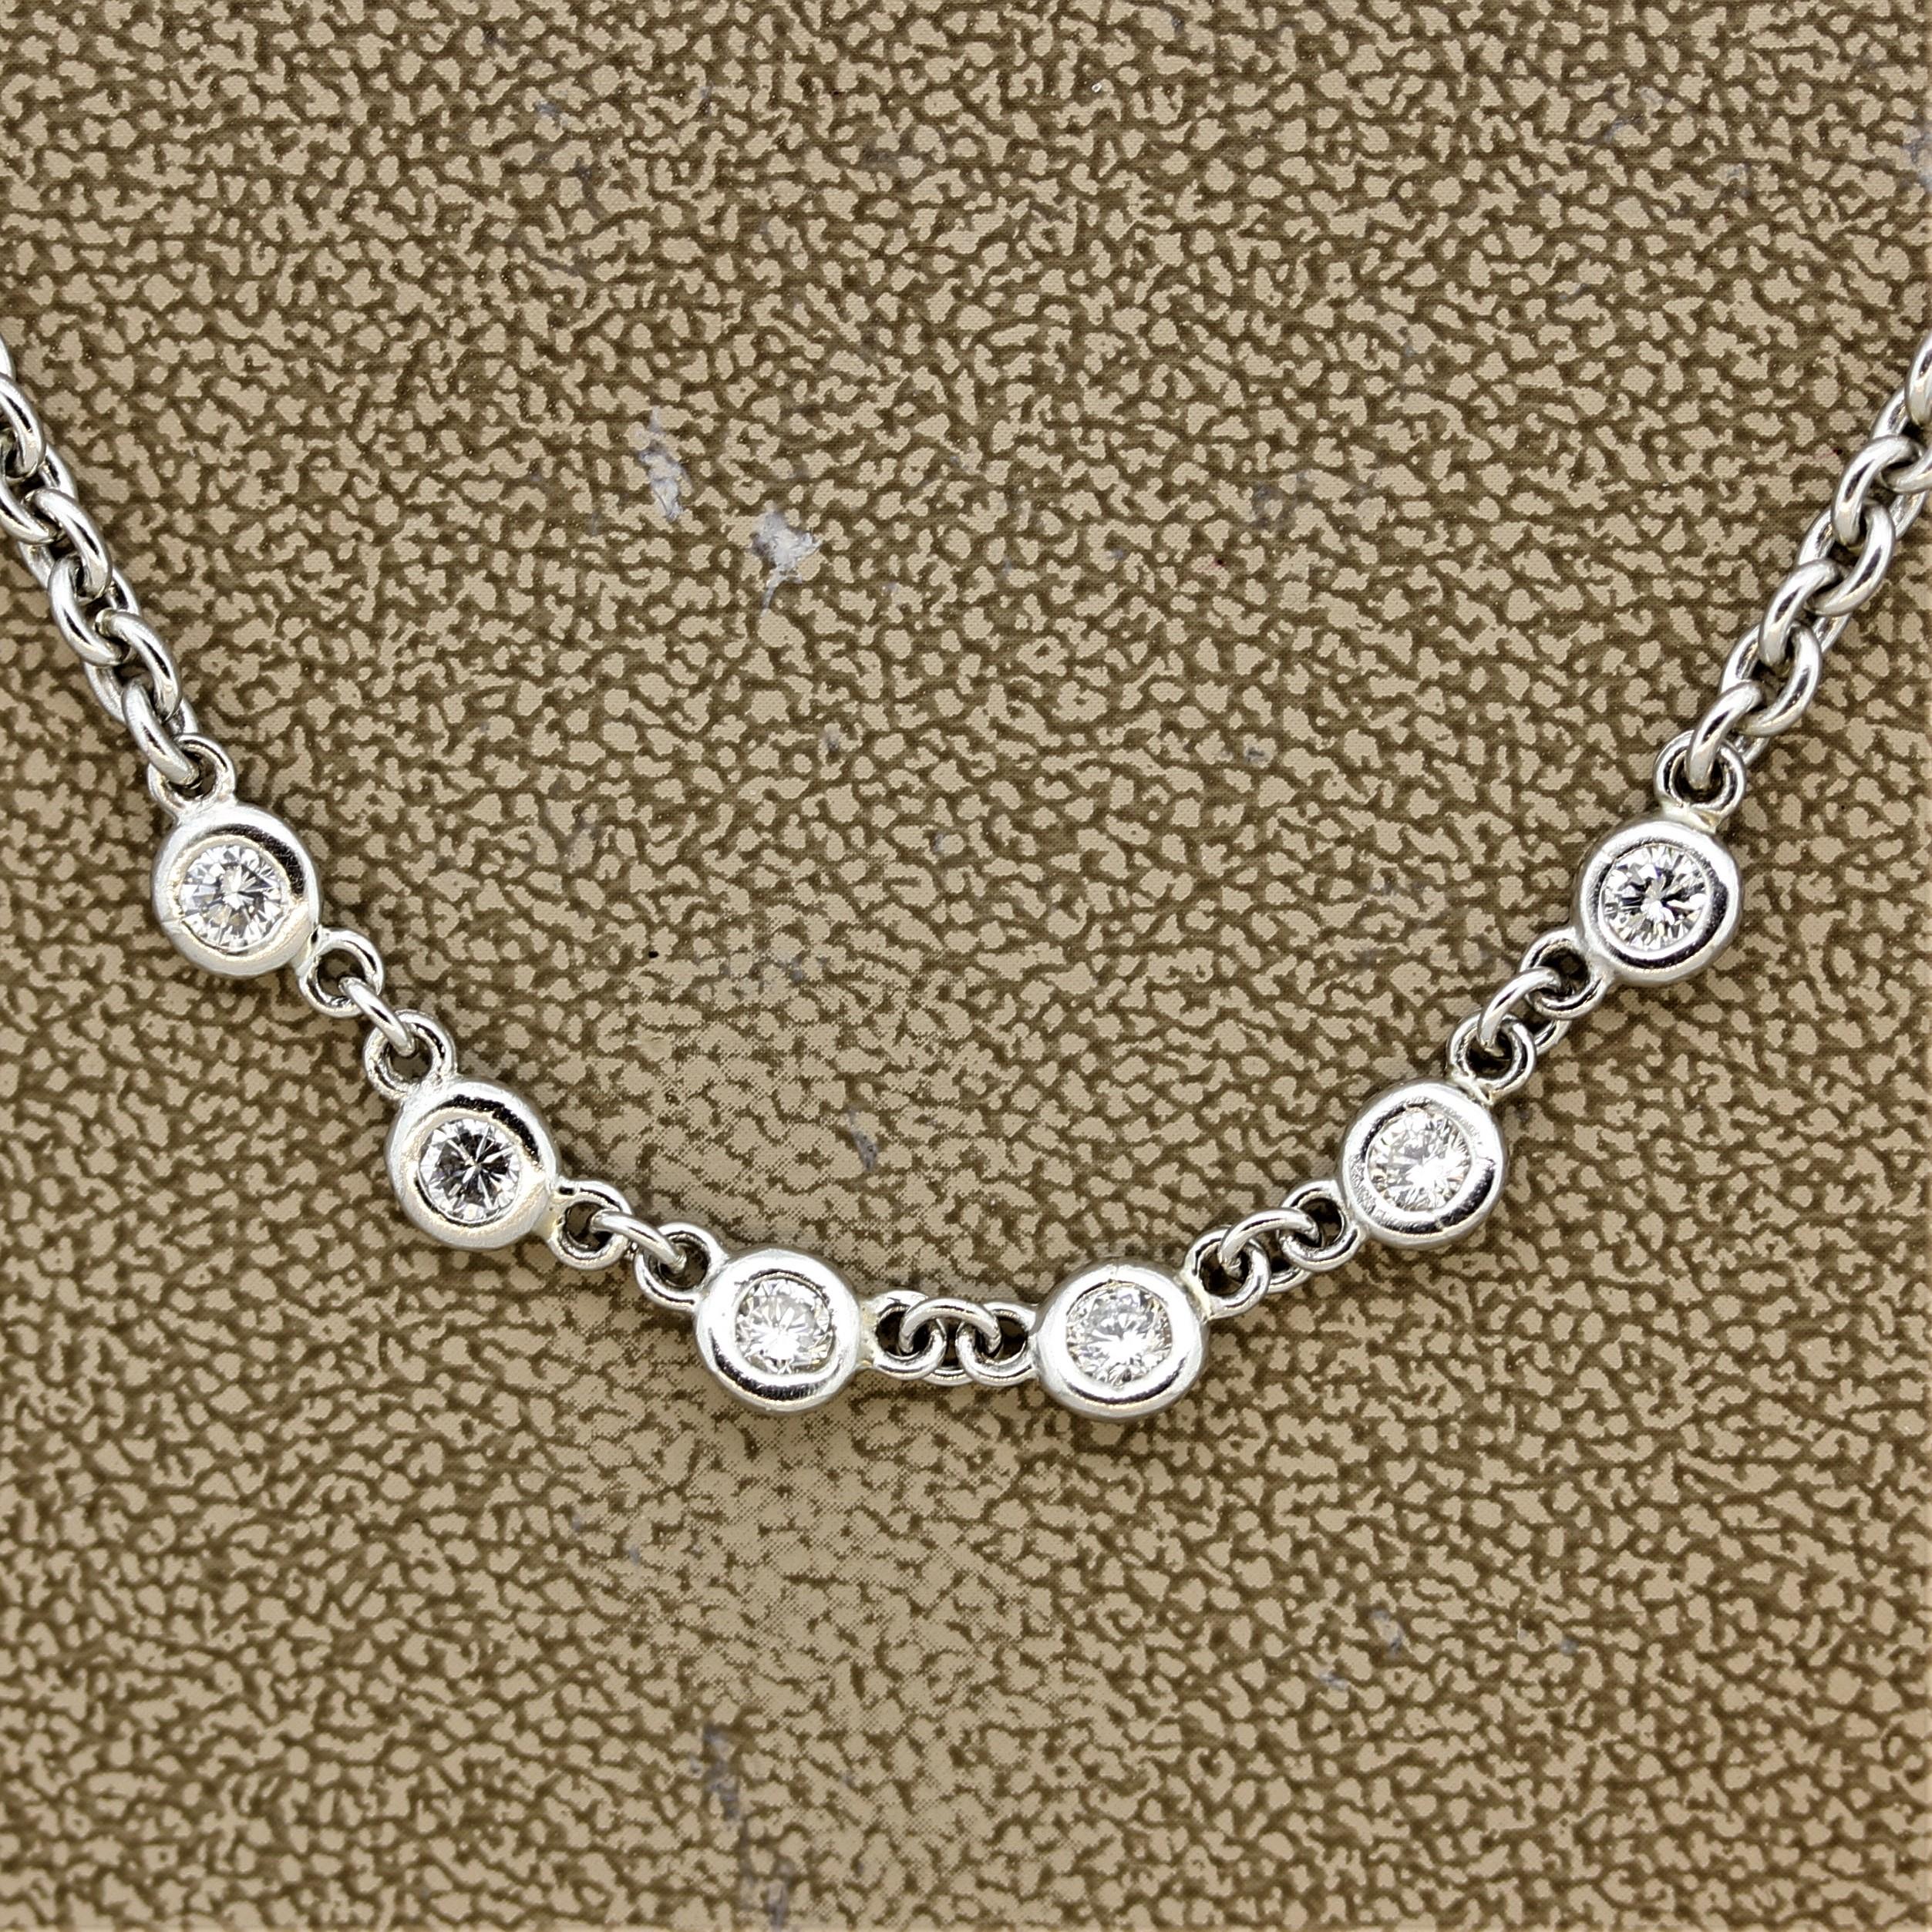 A sweet 16-inch necklace featuring 6 fine round brilliant cut diamonds. Each diamond is bezel set and weighs about 0.11 carats each, totaling 0.68 carats between them all. Hand-fabricated in platinum.

Length: 16 inches